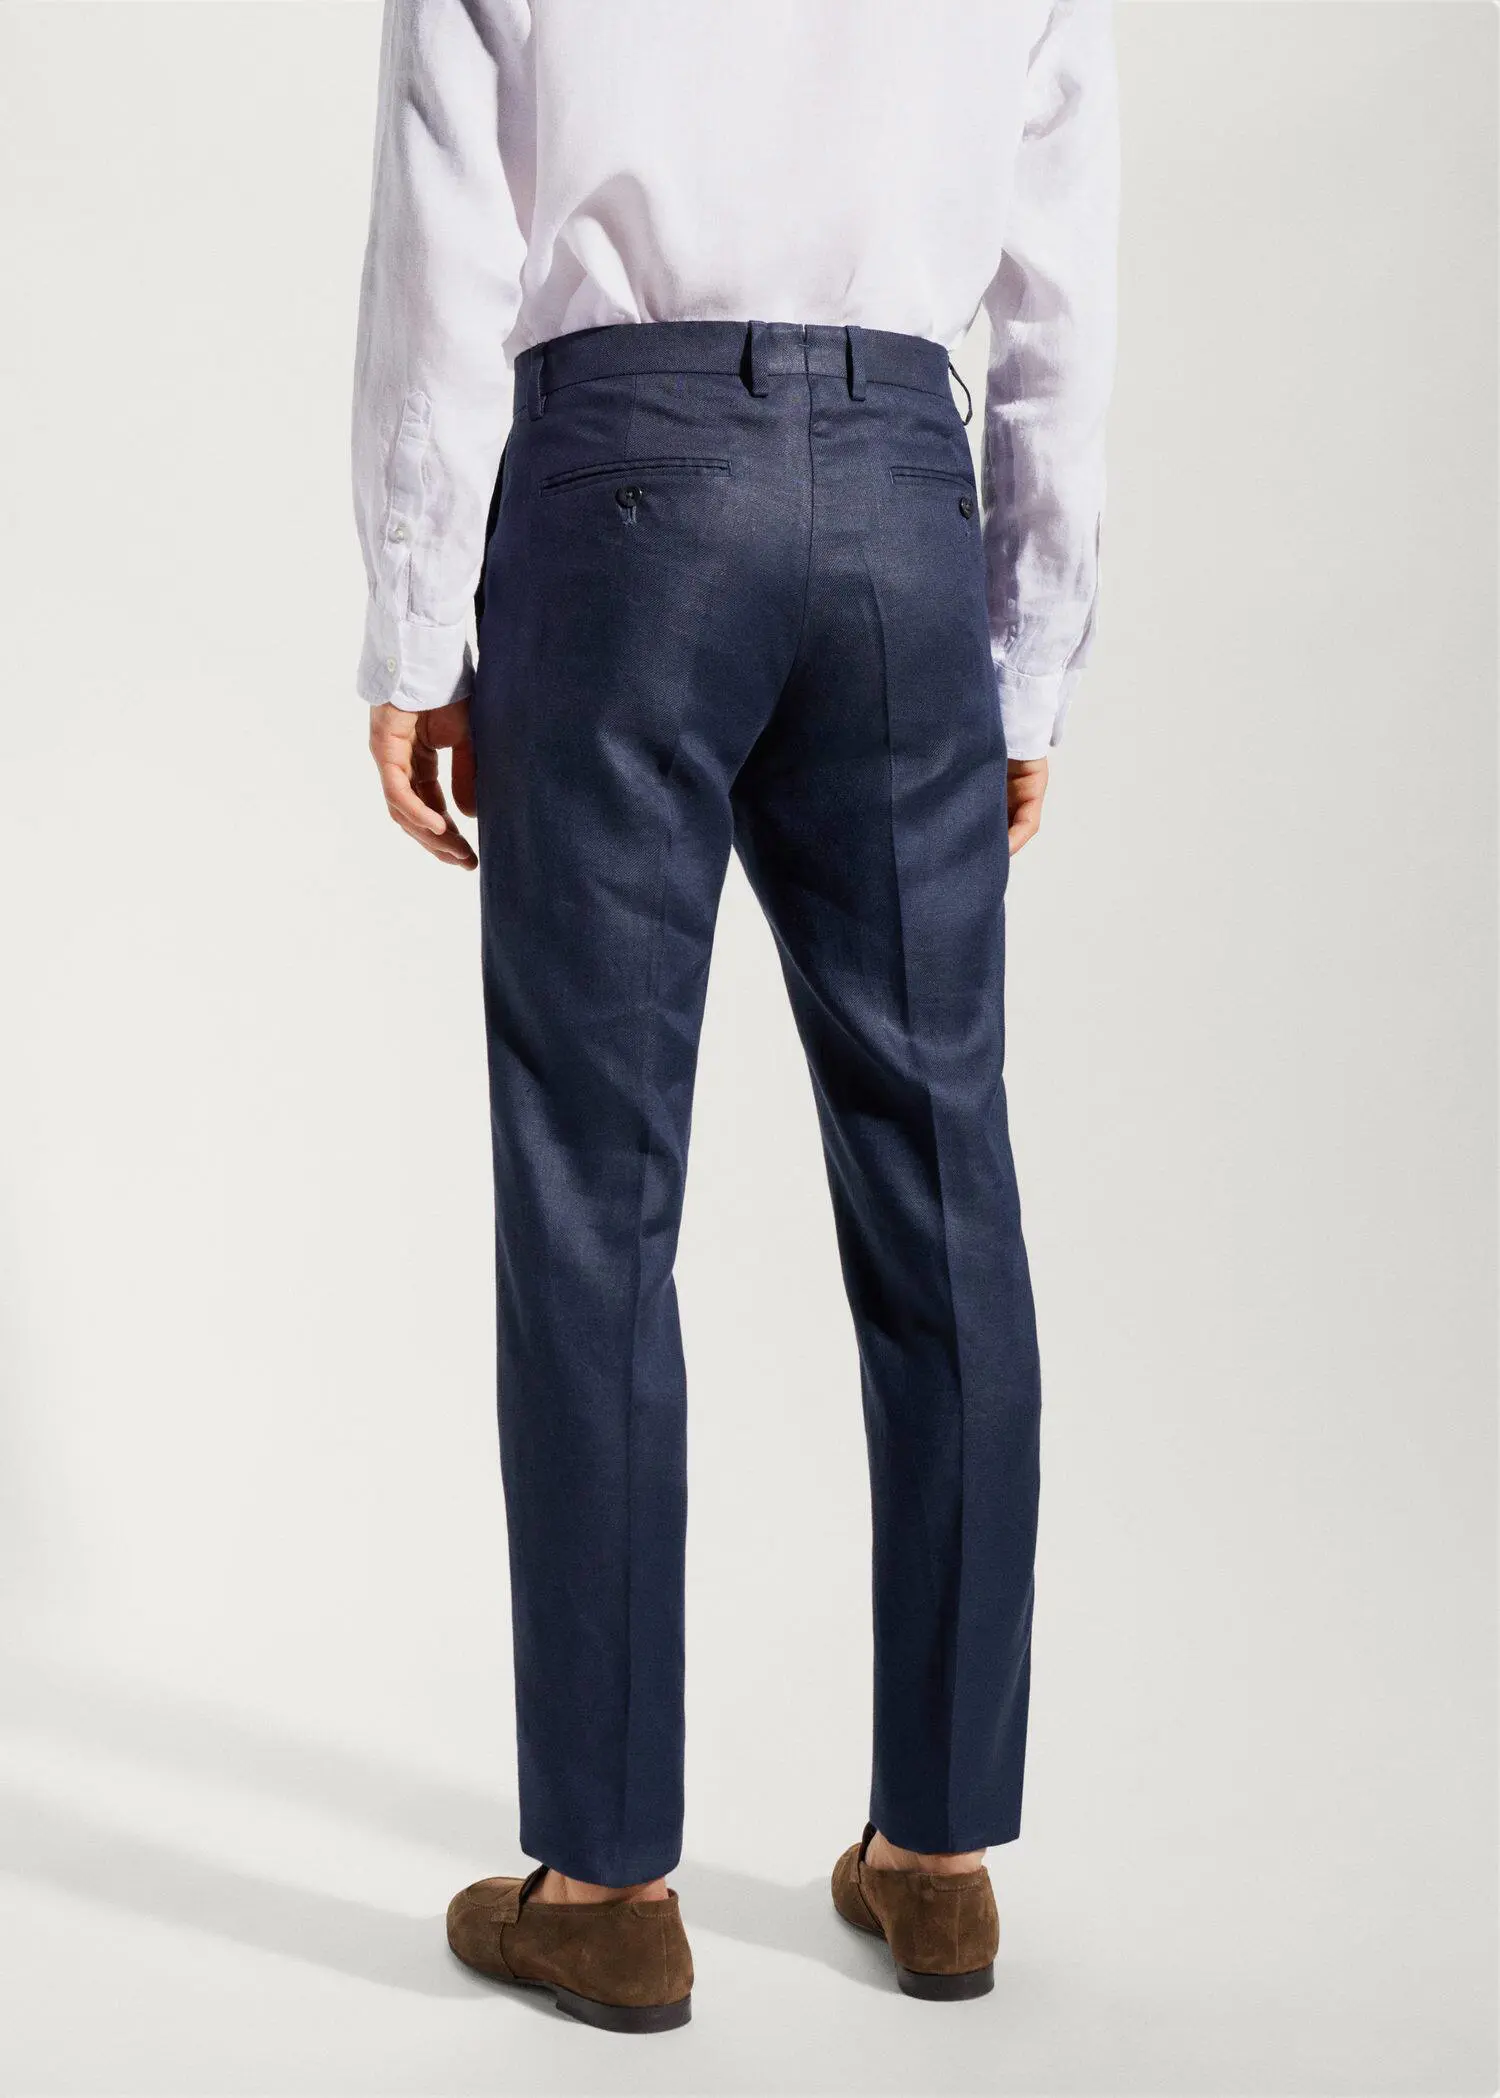 Mango 100% linen suit trousers. a man wearing a suit and a white dress shirt. 